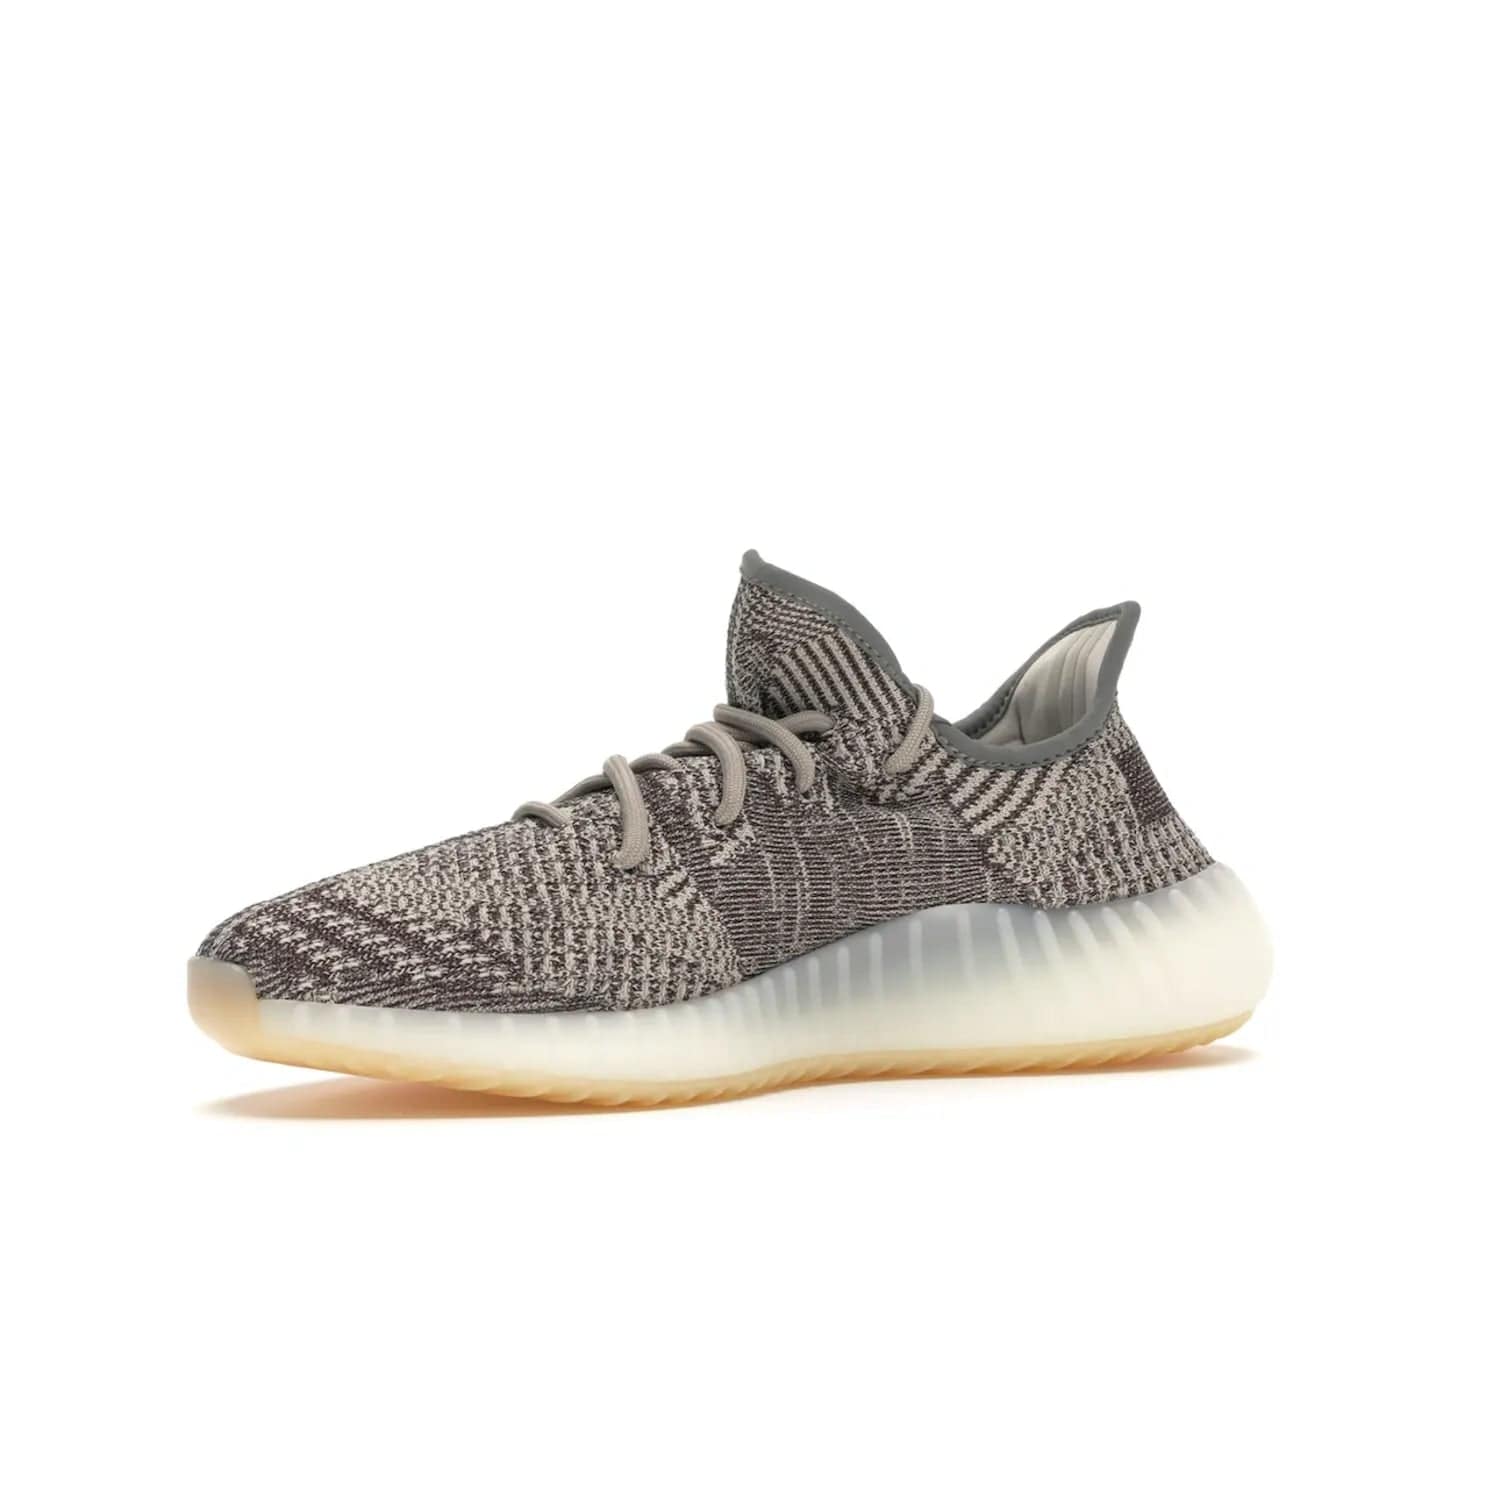 adidas Yeezy Boost 350 V2 Zyon - Image 16 - Only at www.BallersClubKickz.com - Step up your style game with the adidas Yeezy Boost 350 V2 Zyon. This sleek sneaker features a Primeknit upper, dark side stripe, translucent Boost sole, and creamy white interior providing style and comfort. Get them now!